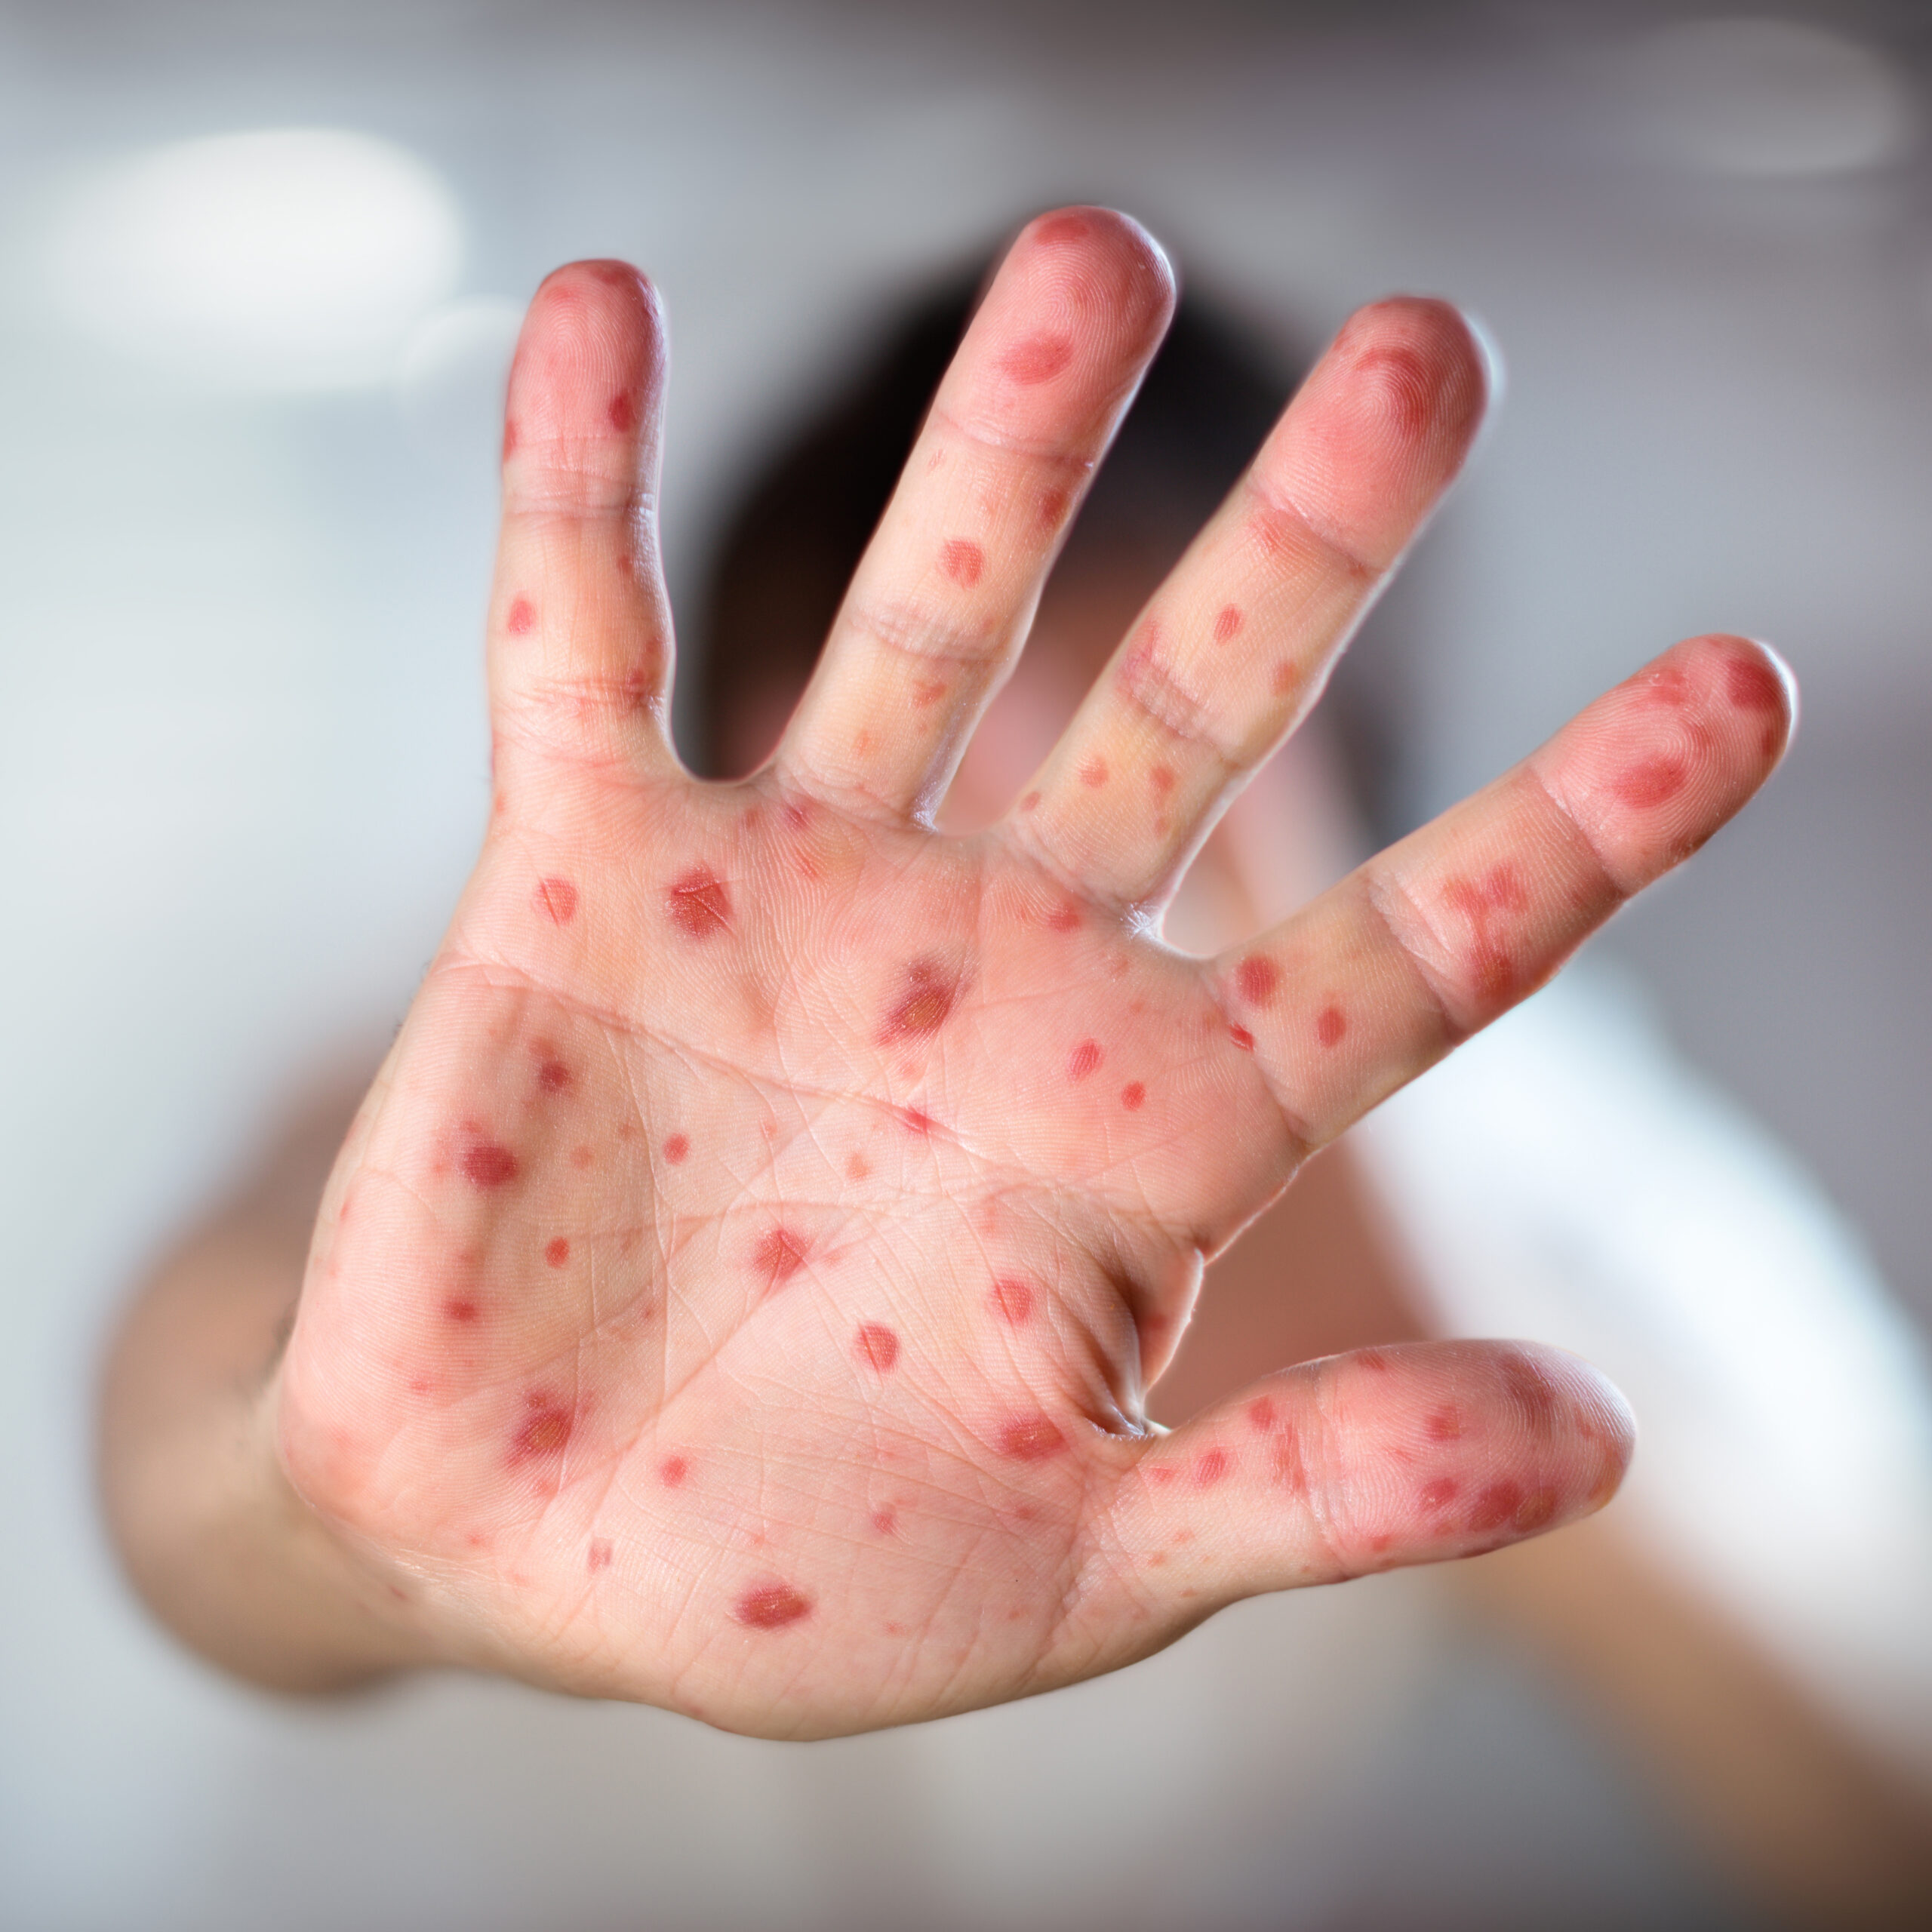 Unvaccinated attendee of big revival has state’s third case of measles in three months